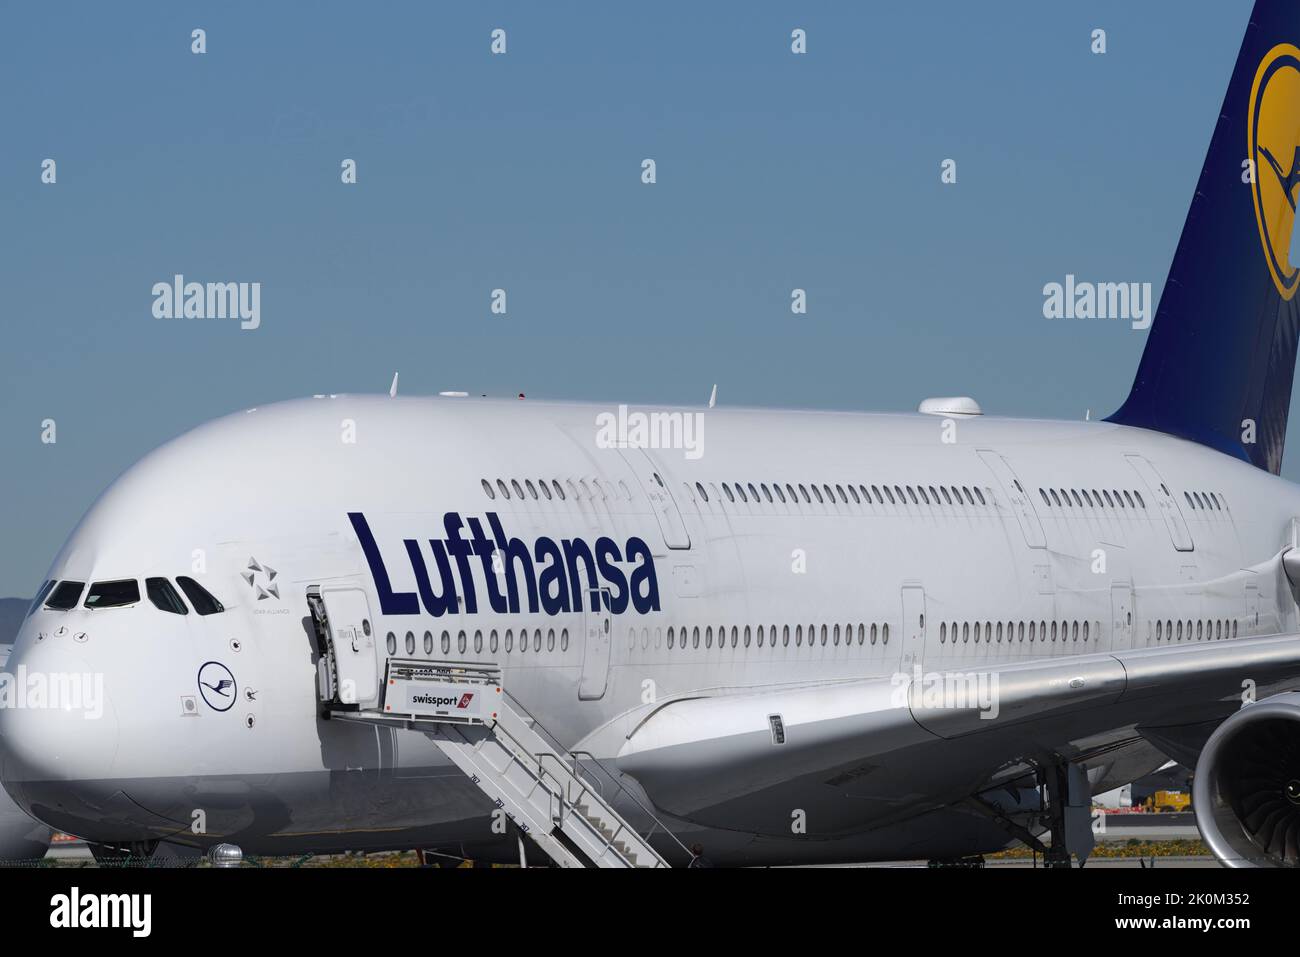 Los Angeles International Airport, California, USA - March 5, 2018: Lufthansa Airbus A380 jet shown parked at LAX. Stock Photo